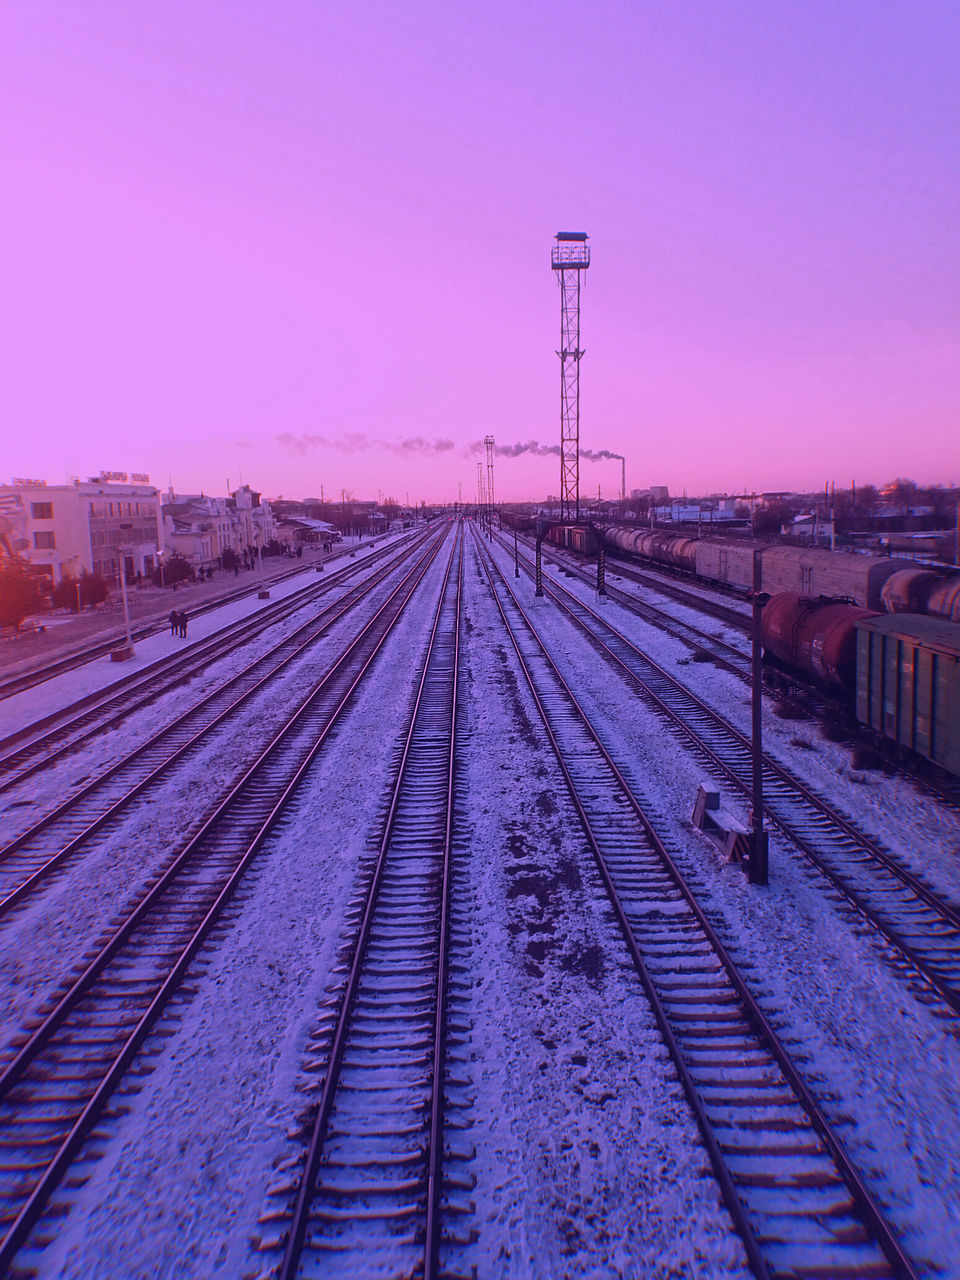 railroad track, rail transportation, track, sky, transportation, nature, transport, horizon, no people, architecture, line, train, railway, technology, sunset, diminishing perspective, mode of transportation, vanishing point, built structure, outdoors, city, snow, clear sky, electricity, dusk, the way forward, public transportation, evening, winter, environment, landscape, travel, cold temperature